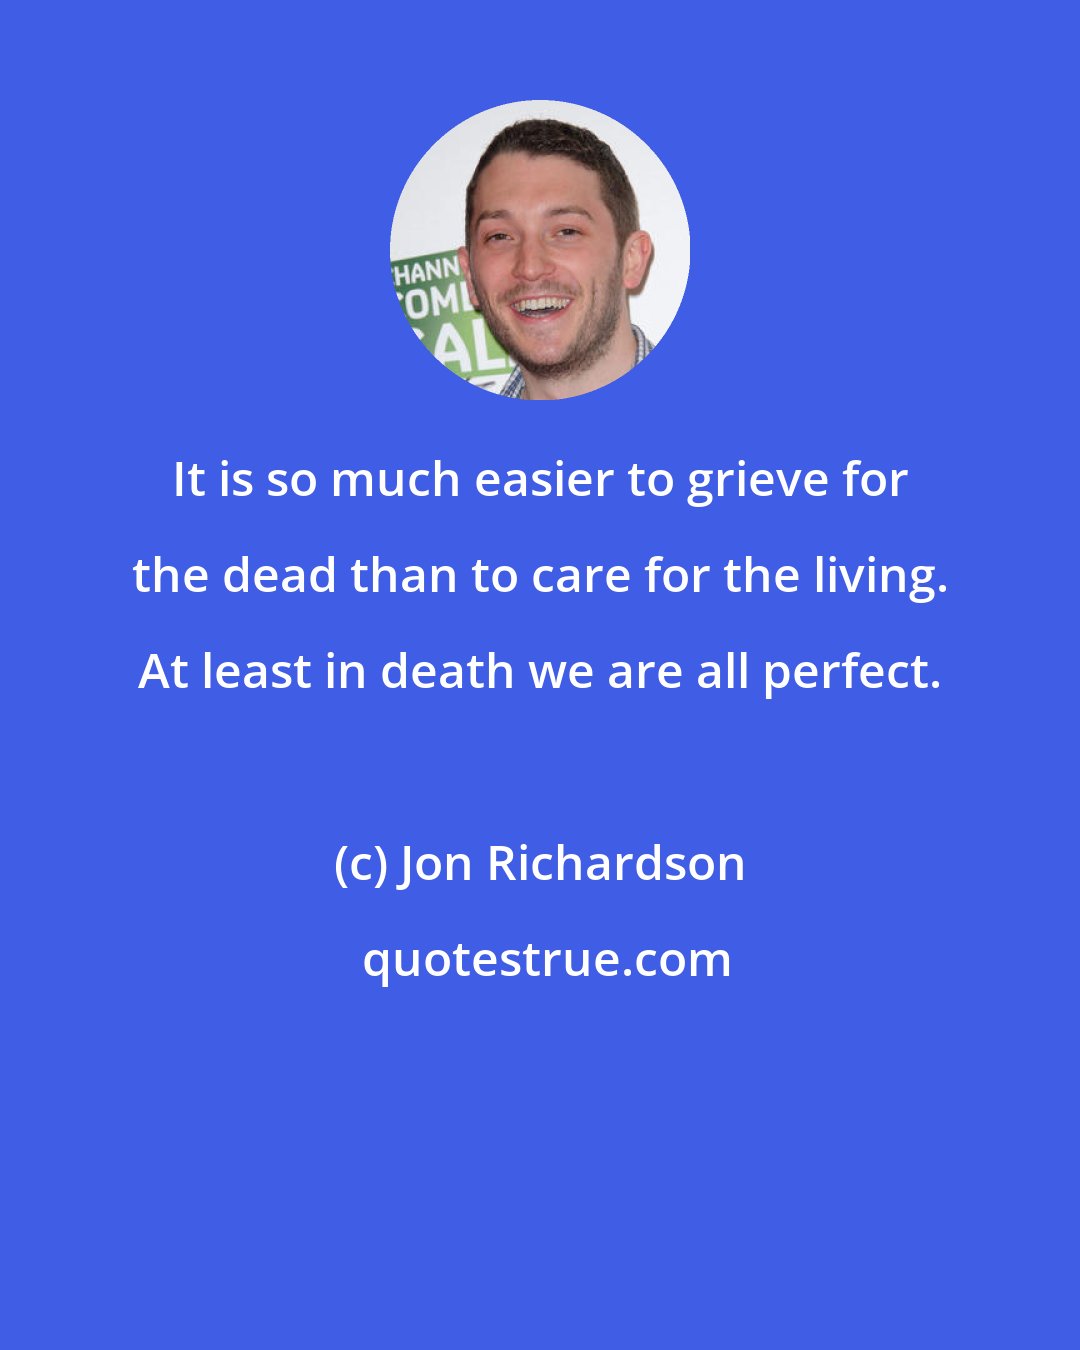 Jon Richardson: It is so much easier to grieve for the dead than to care for the living. At least in death we are all perfect.